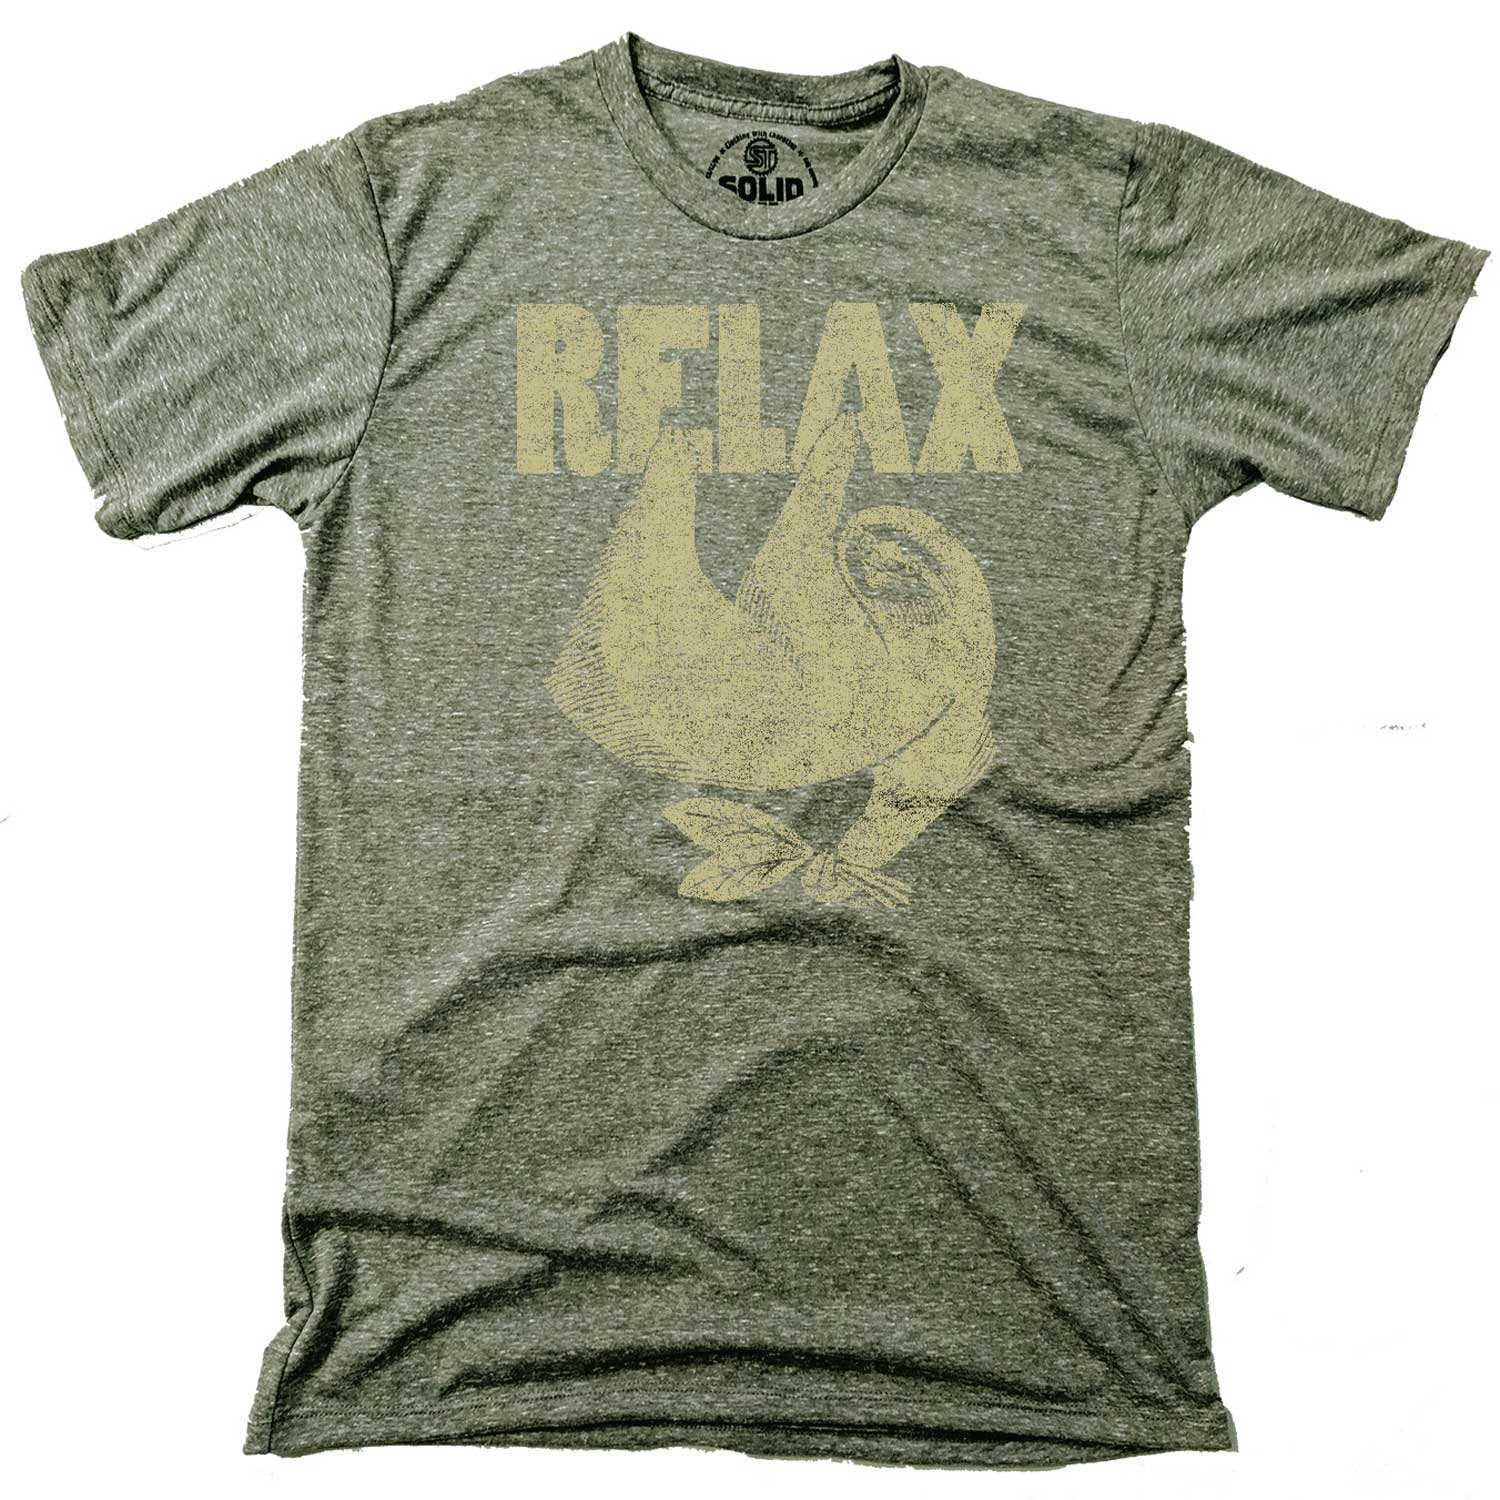 Men's Relax Vintage Mindfulness Graphic T-Shirt | Funny Sloth Soft Tee | Solid Threads